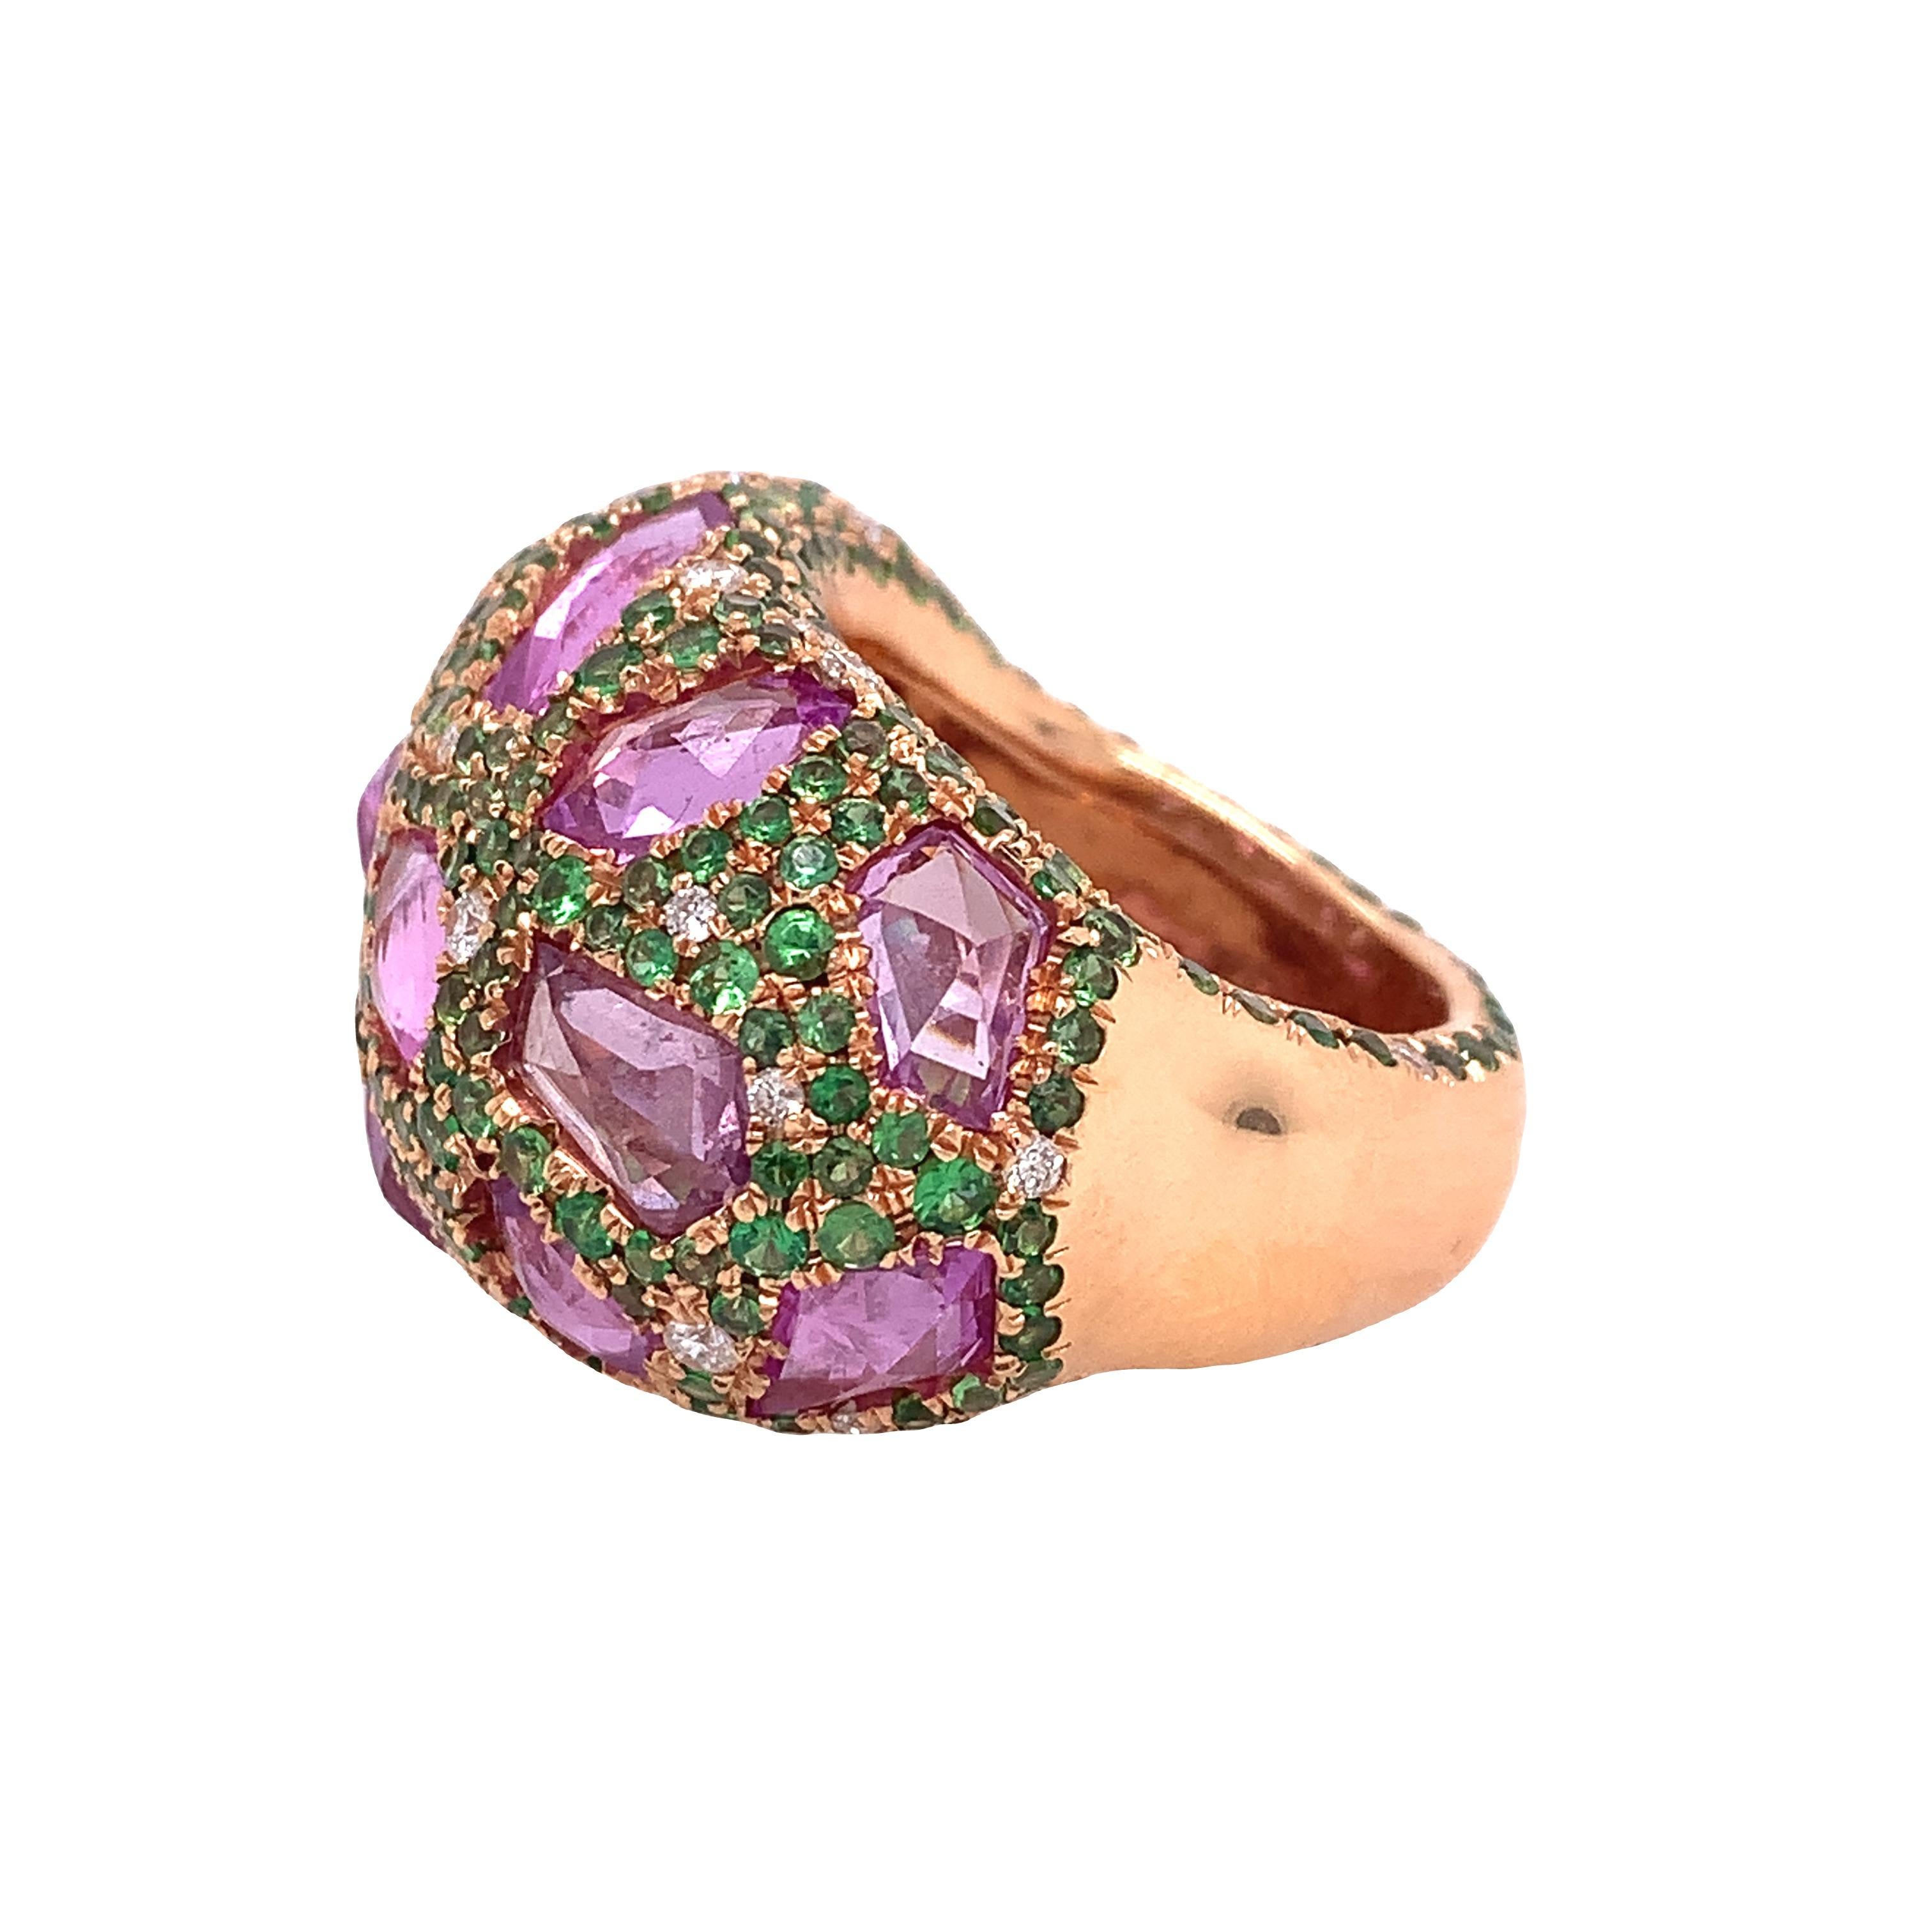 18K Rose Gold.
Pink Sapphire: 7.70ct total weight
Tsavorite: 3.49ct total weight
Diamond: 0.36ct total weight
All diamonds are G-H/SI stones.